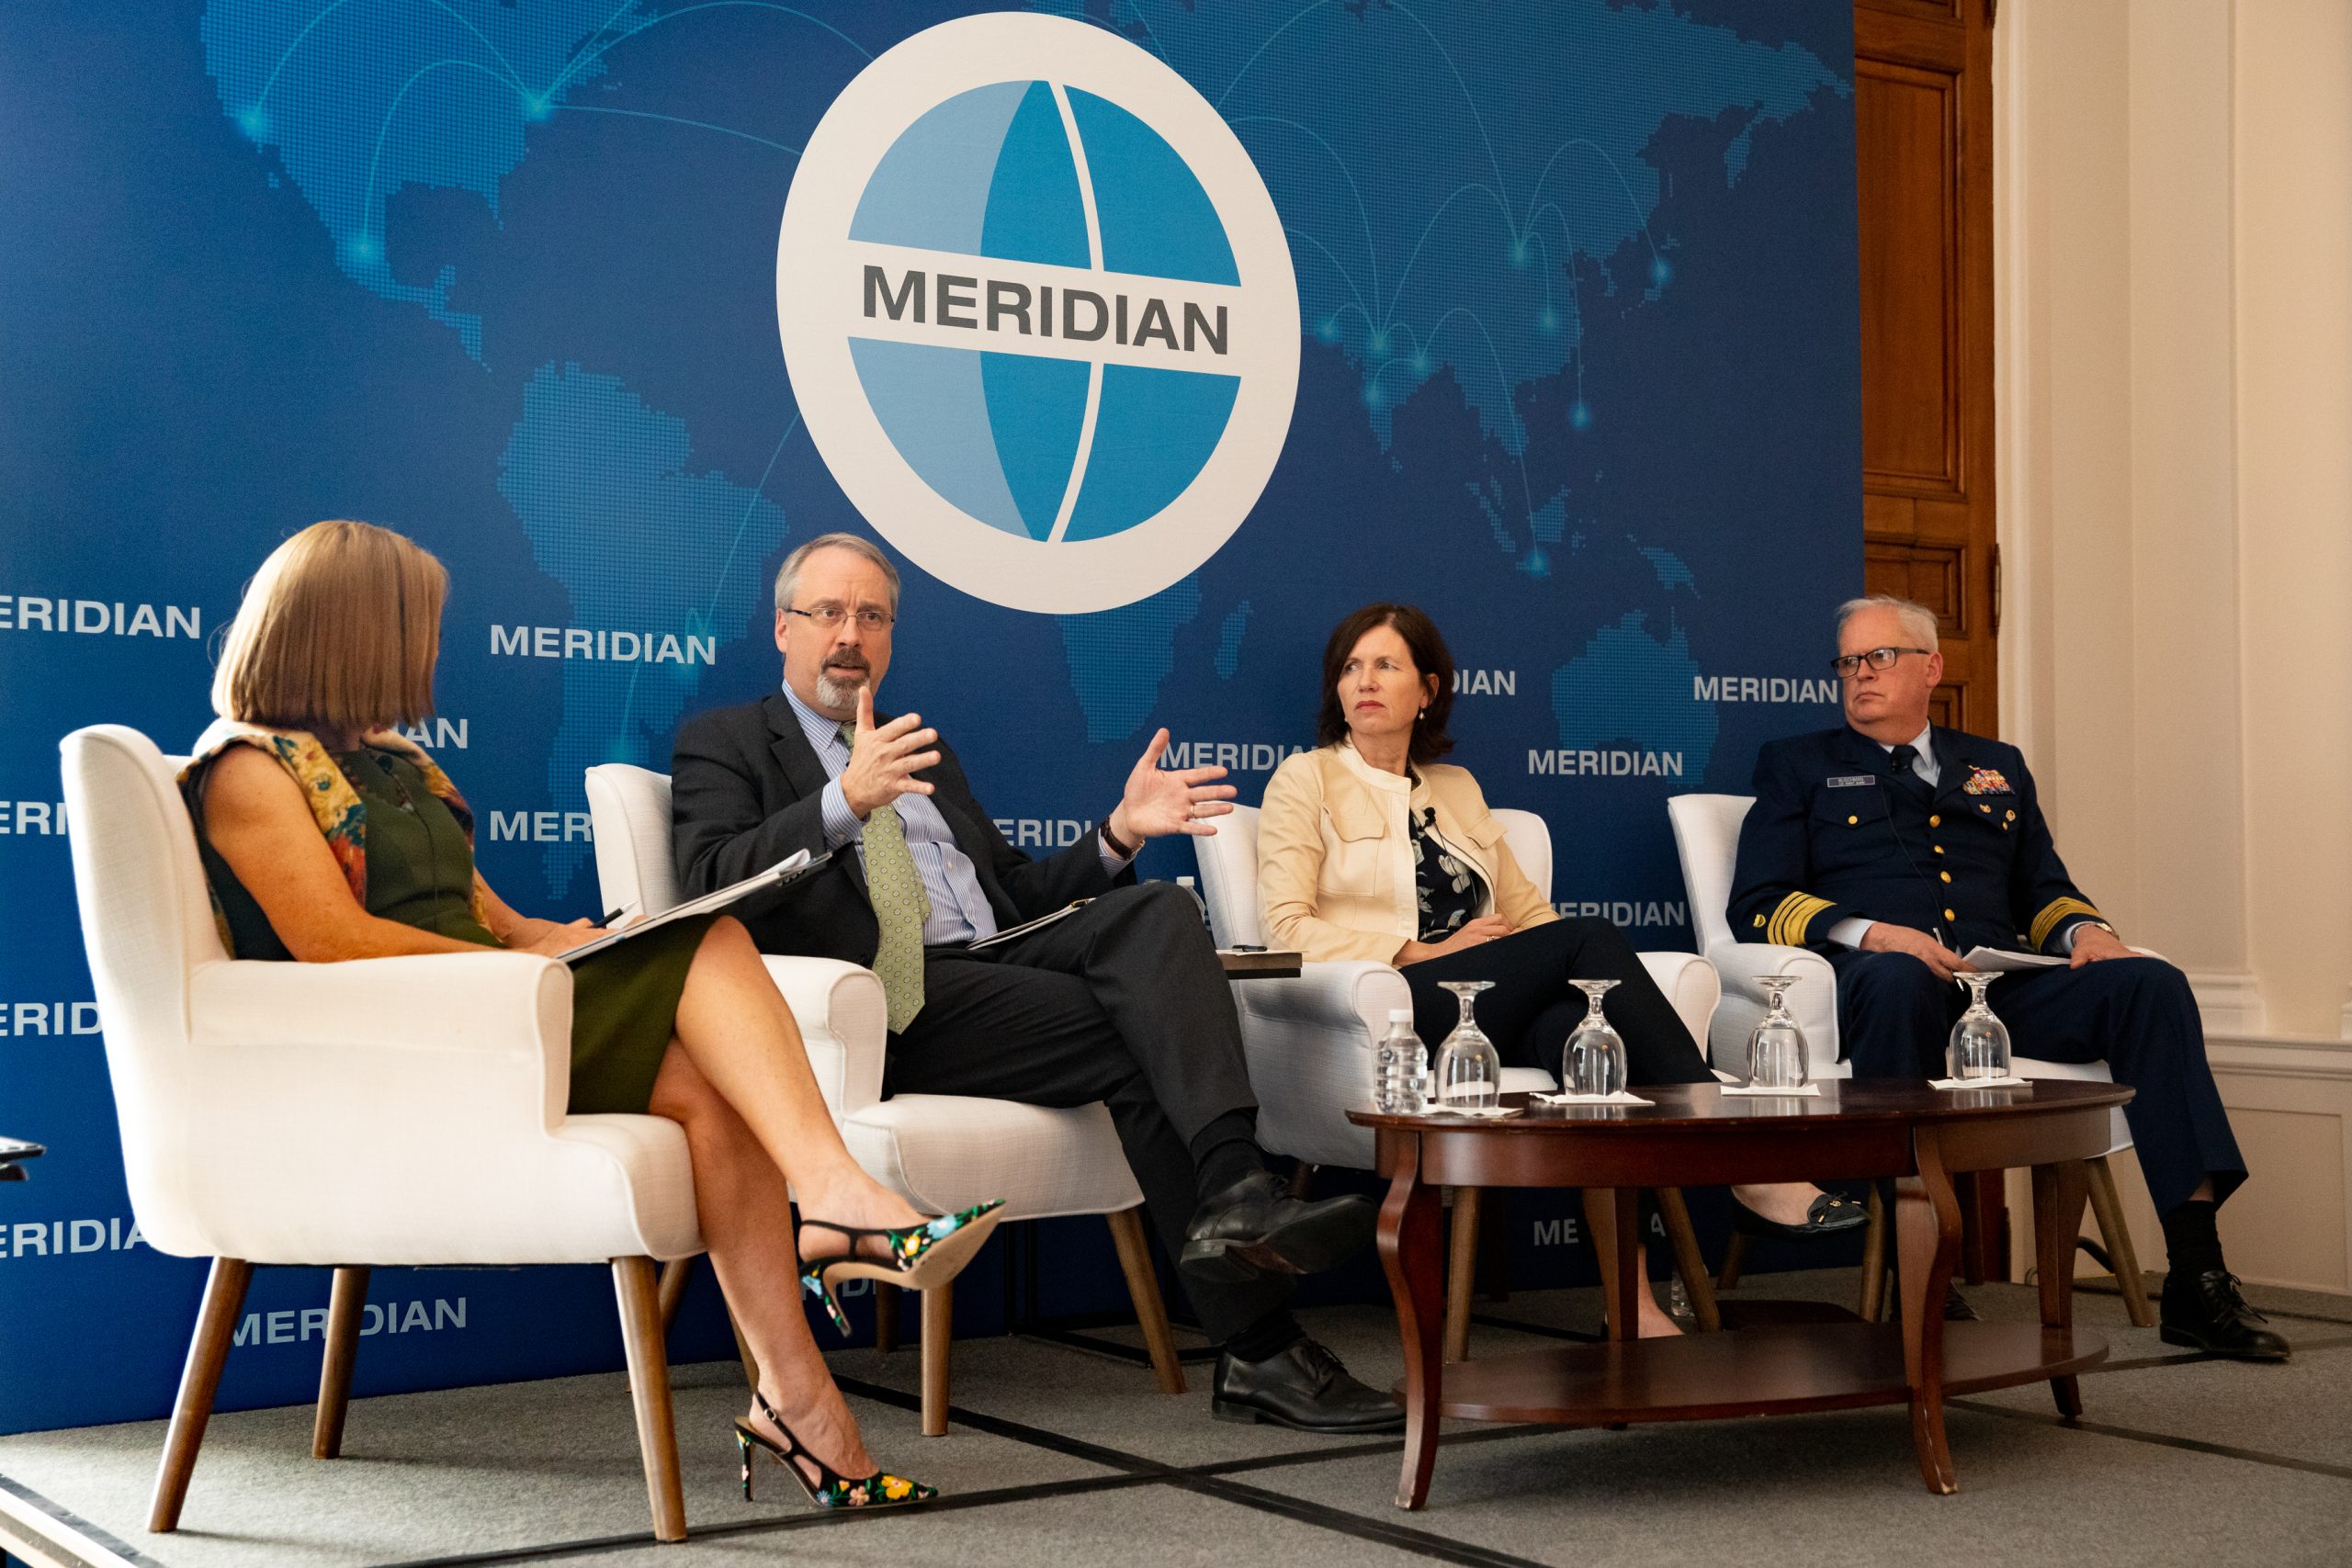 James DeHart, U.S. Coordinator for the Arctic Region, U.S. Department of State, speaks onstage during the 2022 Diplomacy Forum’s “Breaking the Ice: The Emerging Landscape for Arctic Diplomacy” panel.